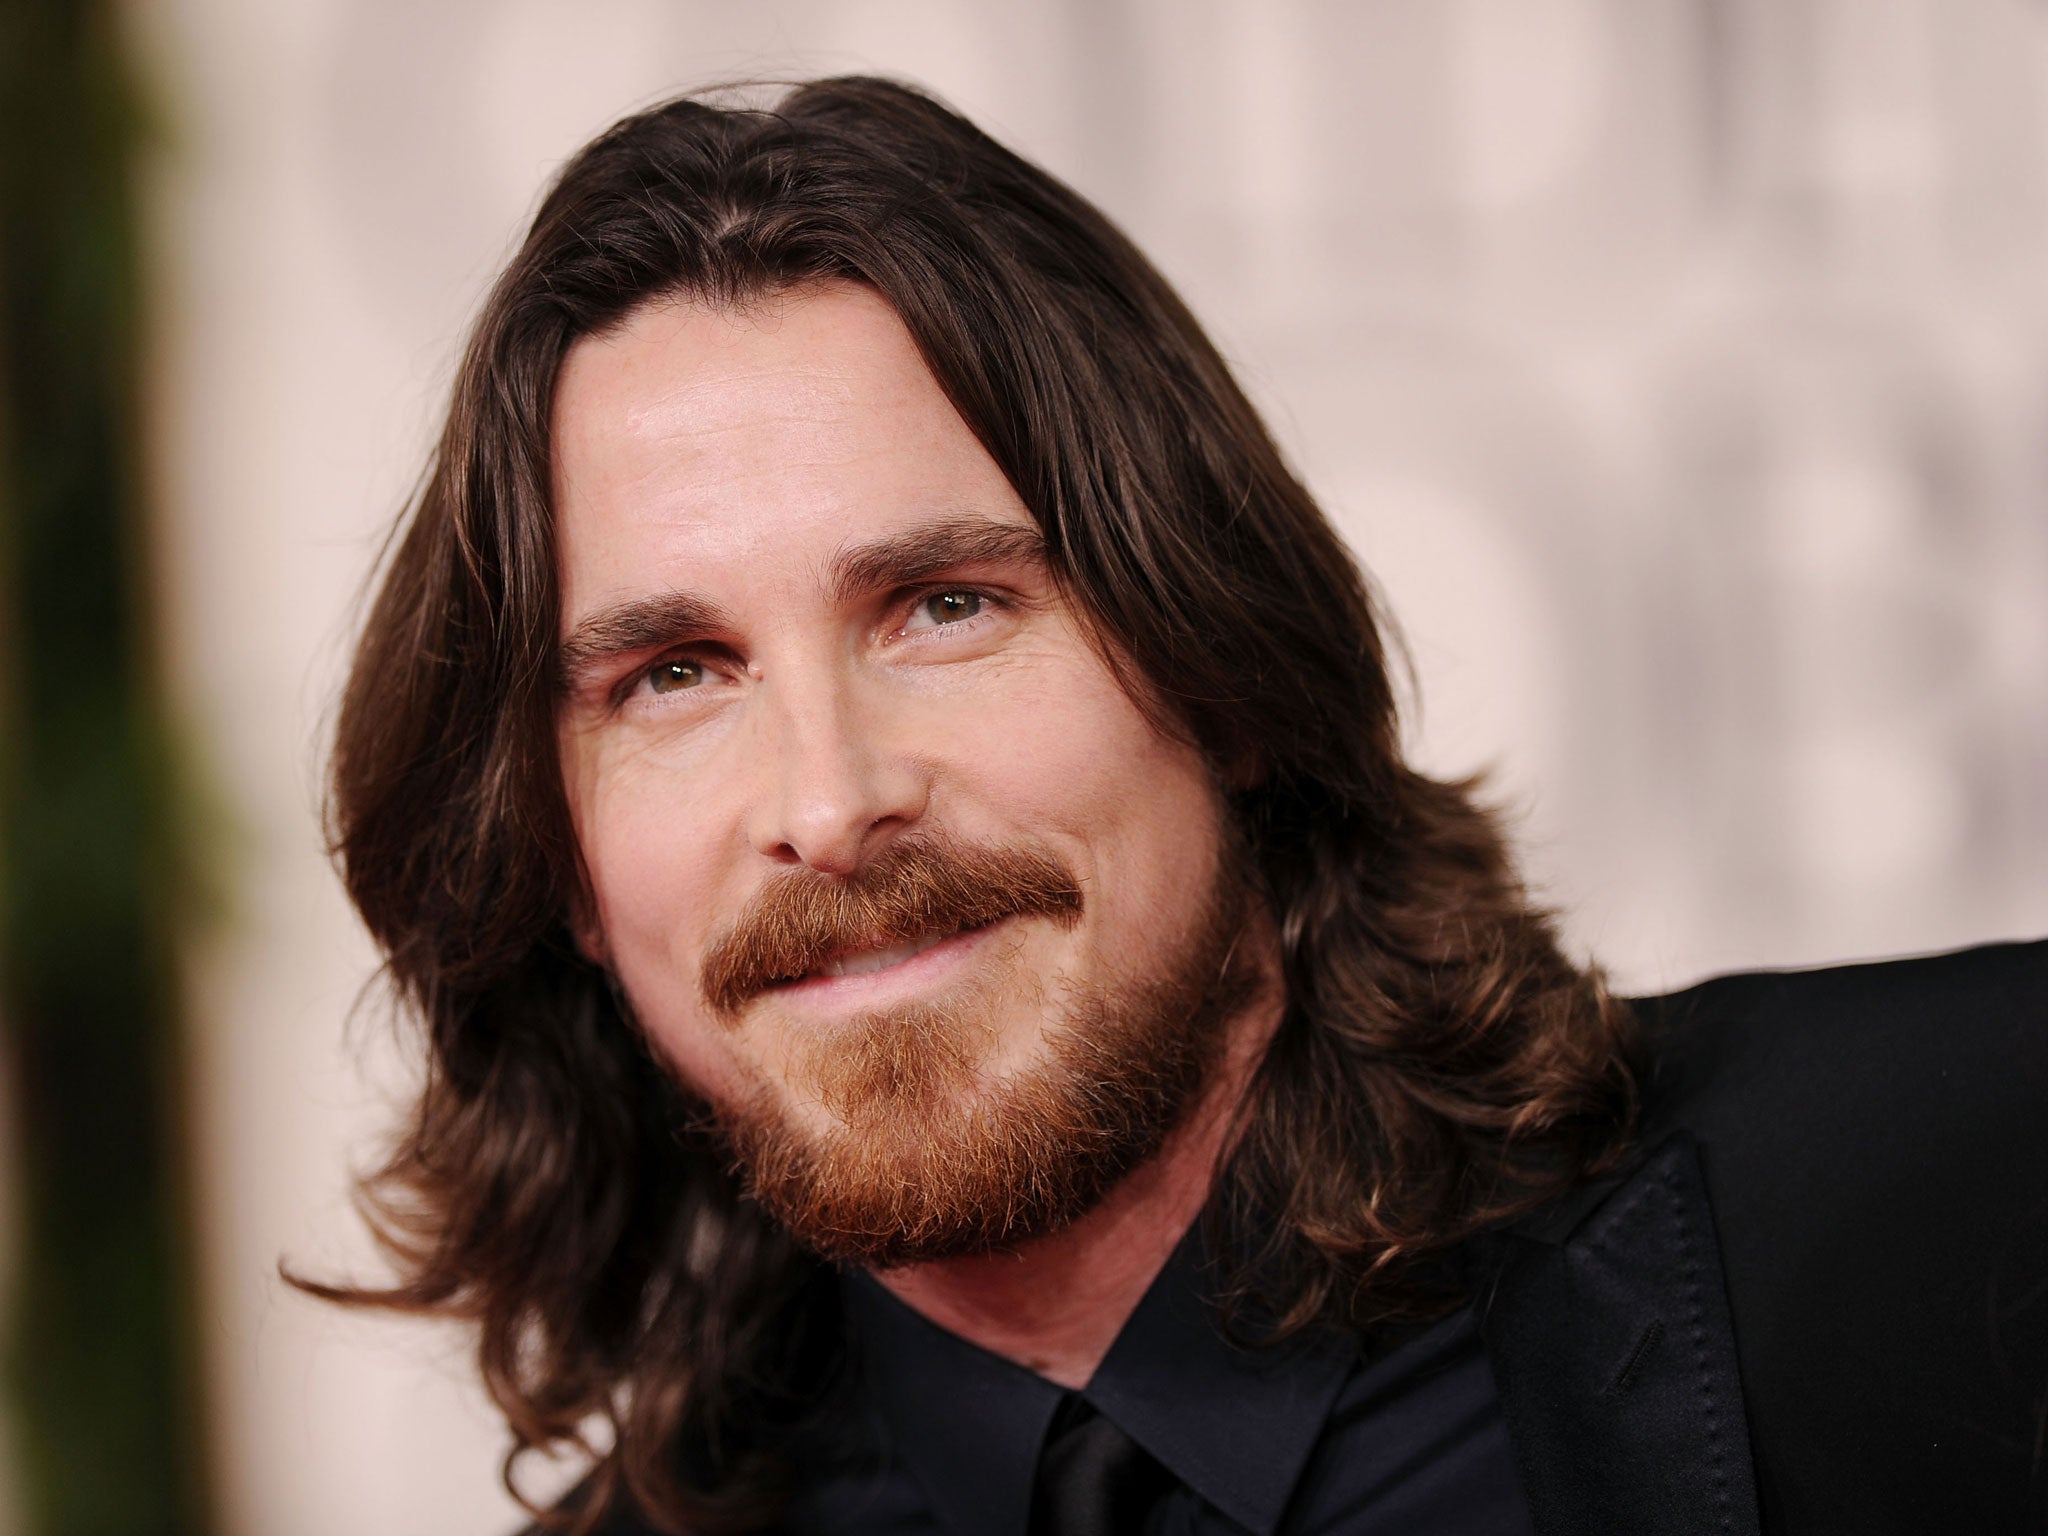 Christian Bale has concentrated on film up to this point